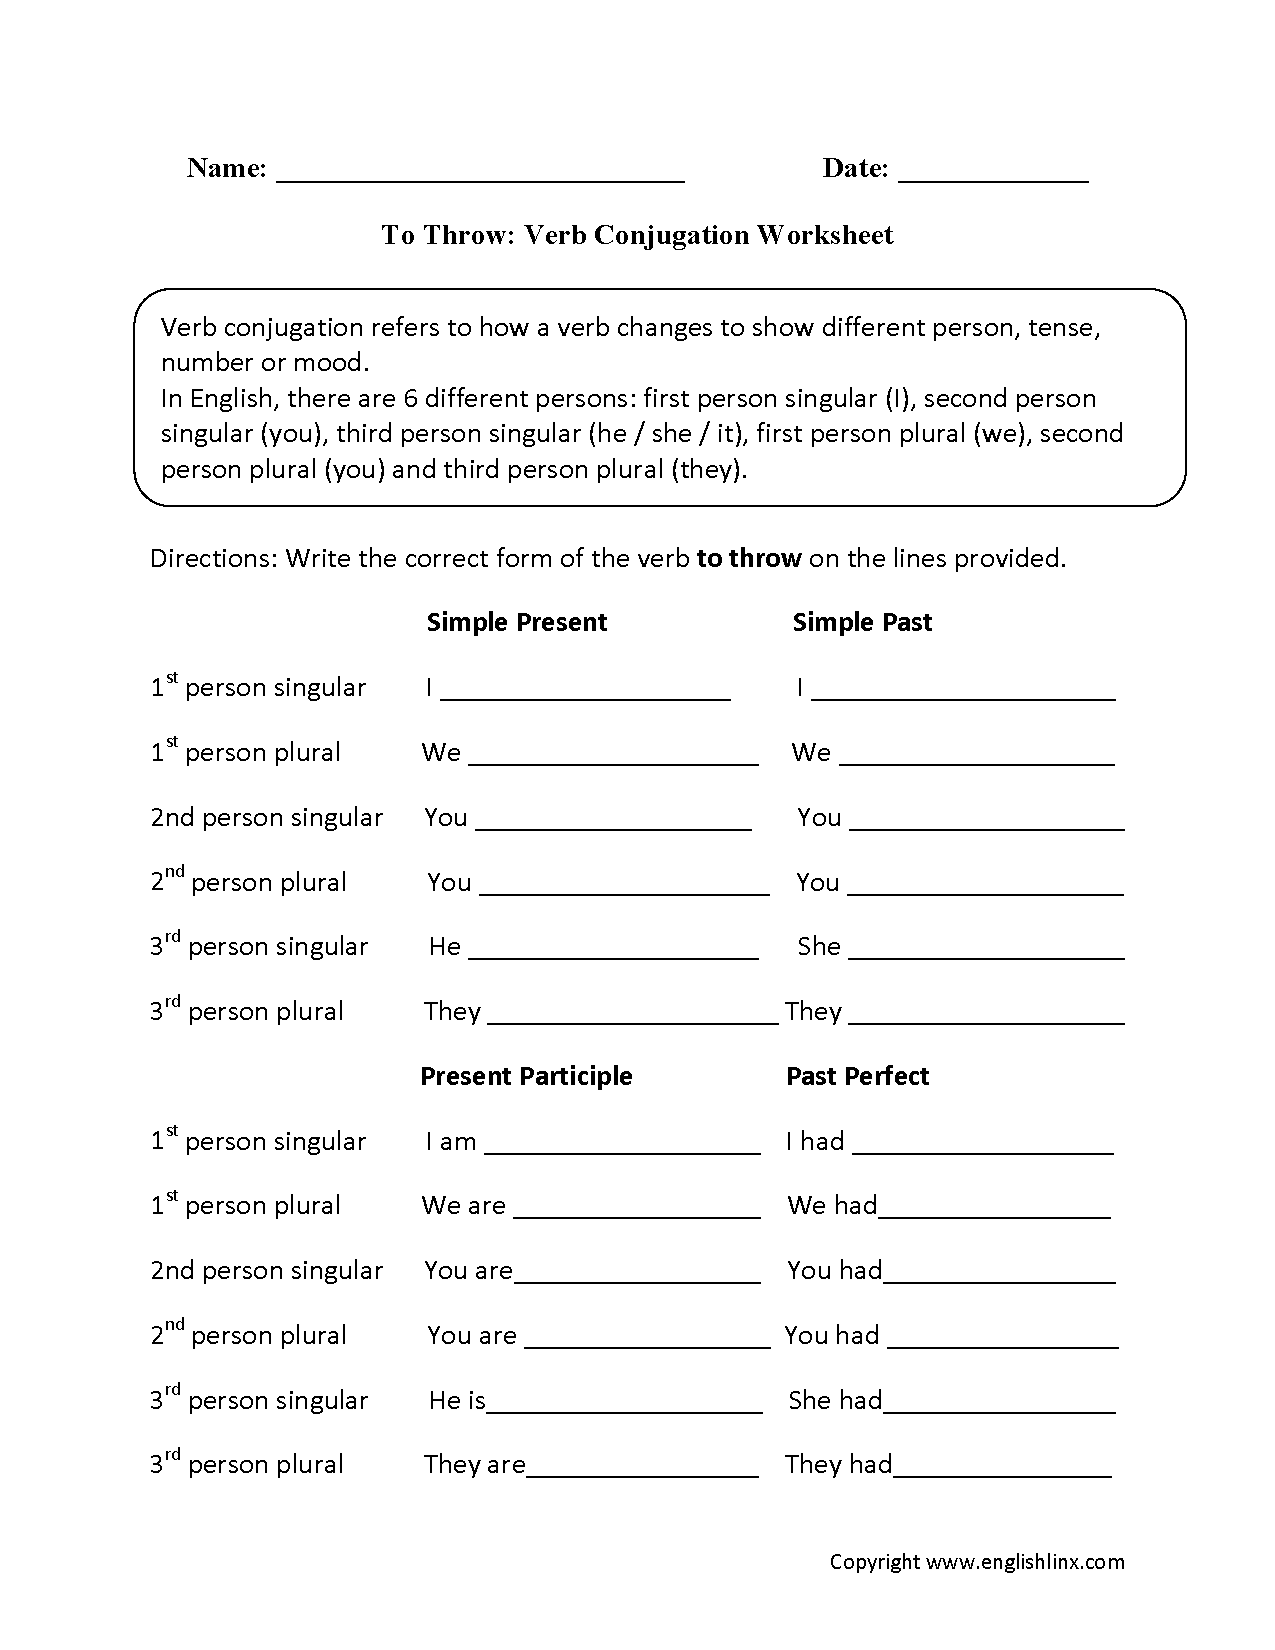 To Throw Verb Conjugation Worksheets